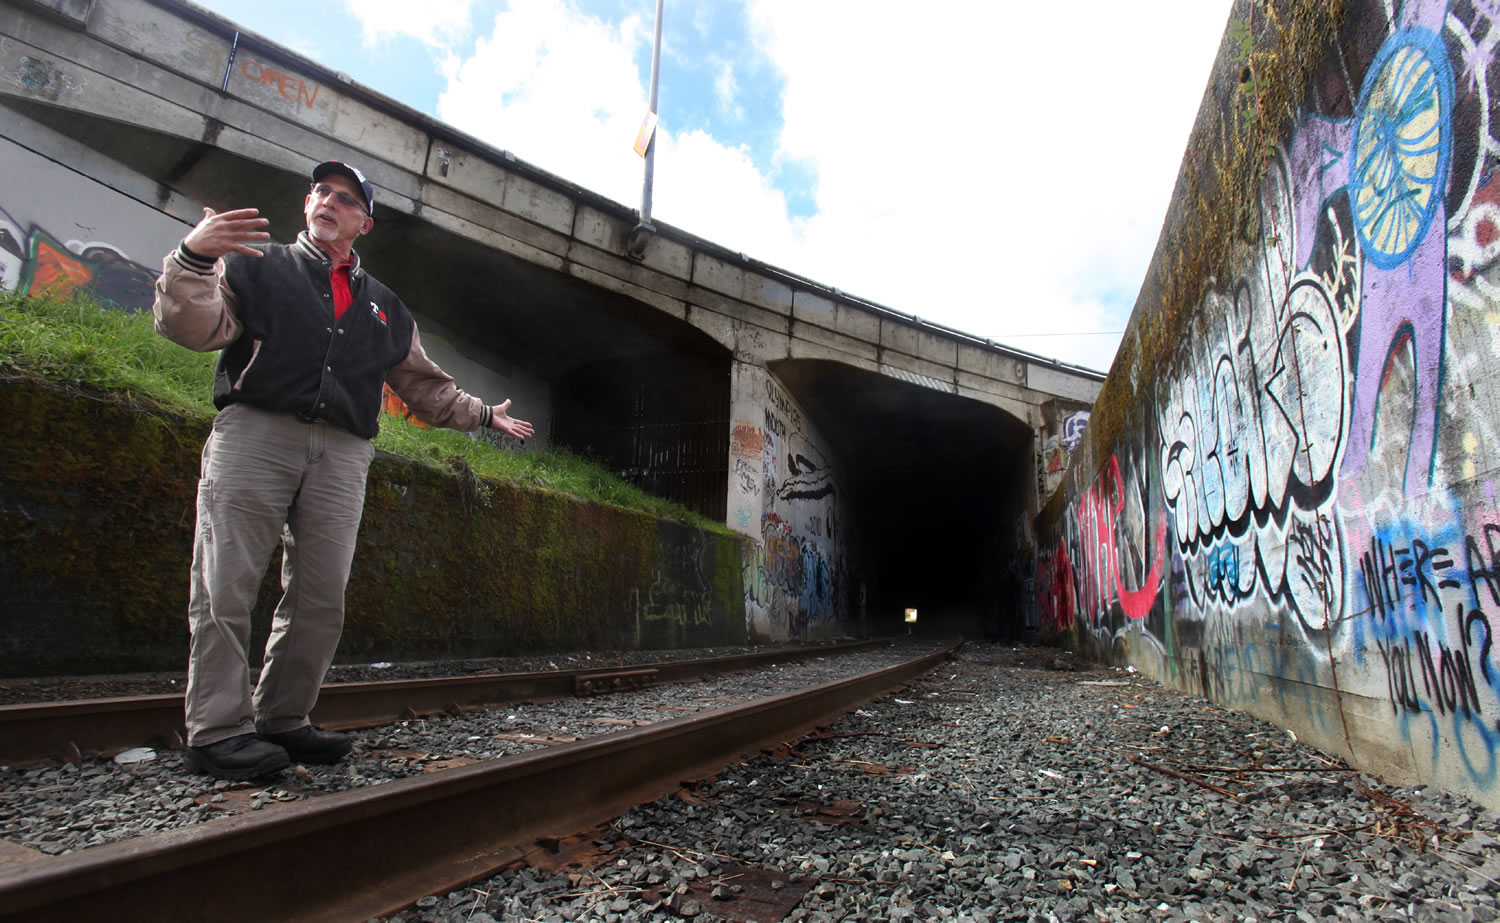 Tacoma Rail conductor Max Chabo stands Tuesday near the entrance to the tunnel at 8th and Cherry Street in Olympia. Chabo dragged a homeless man off the train tracks inside the tunnel last year.